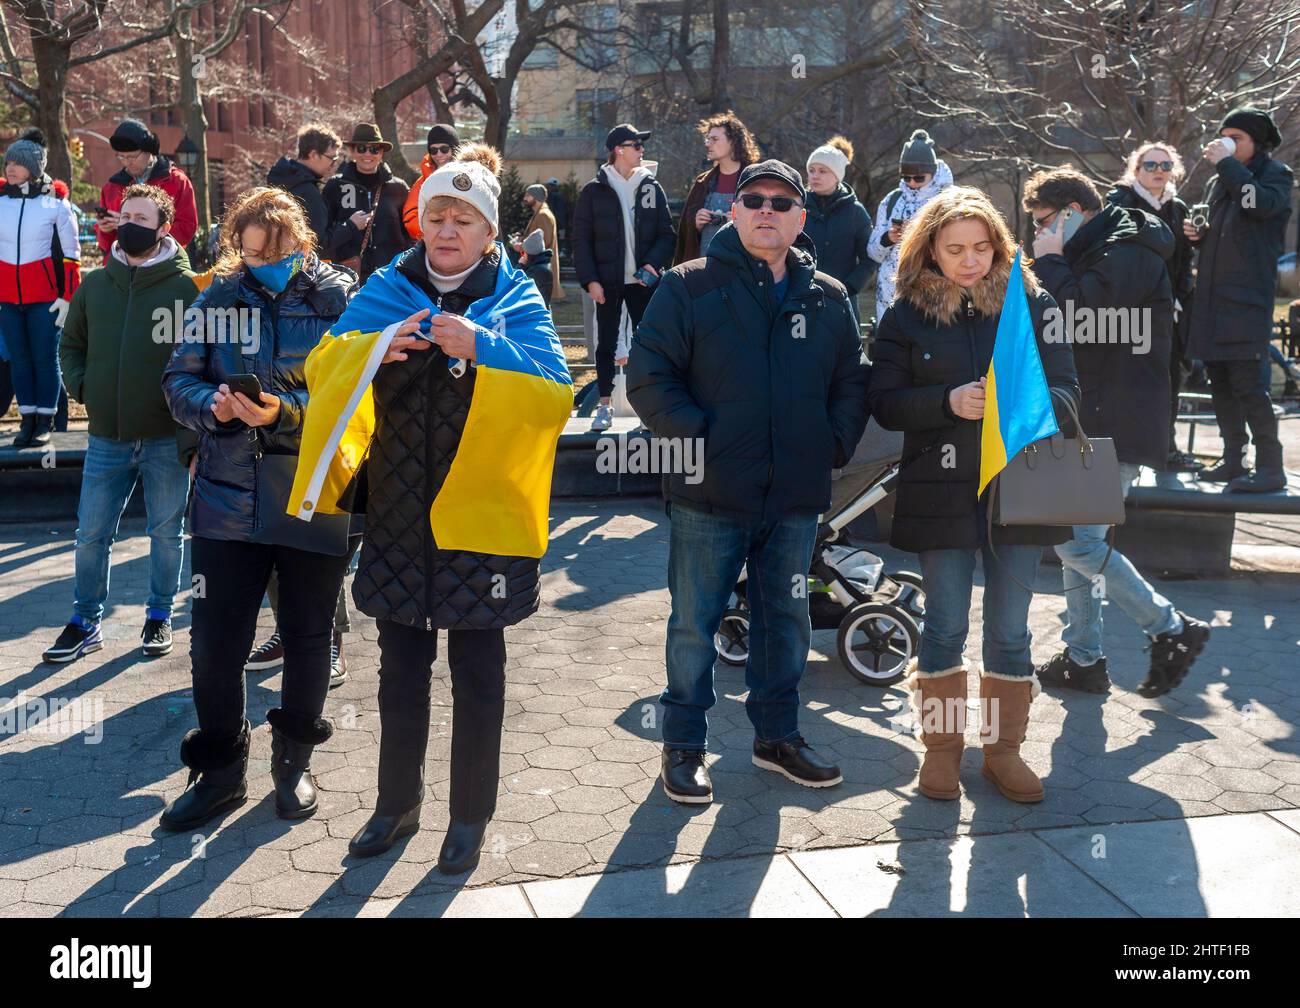 Ukrainian-Americans and their supporters protest the Russian invasion and show support for the citizens of the Ukraine, in Washington Square Park in New York on Sunday, February 27, 2022. (© Richard B. Levine) Stock Photo